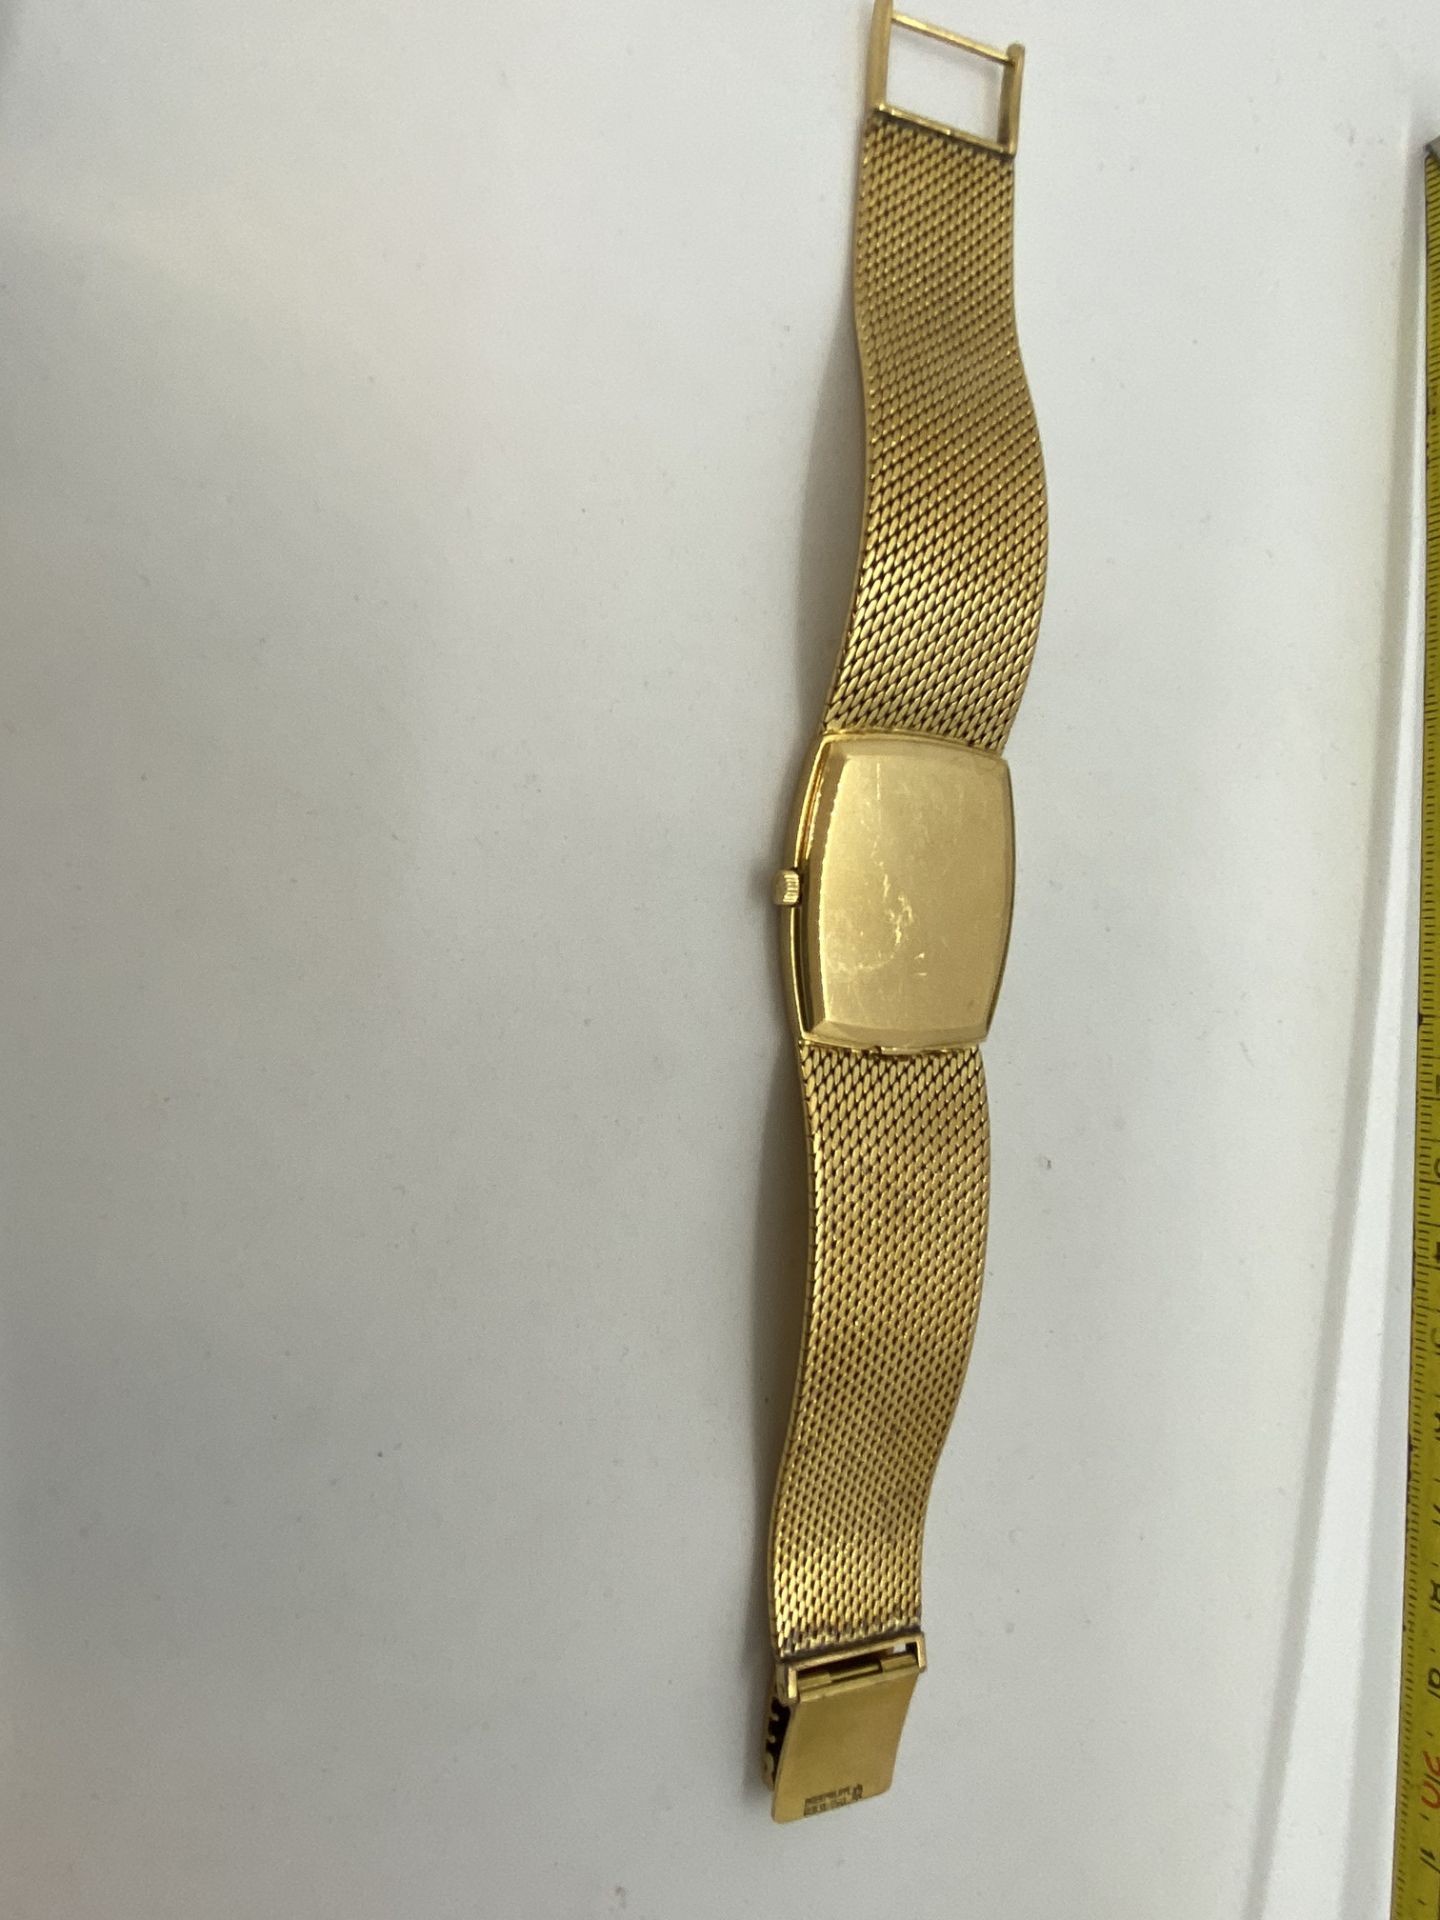 PHILLIPE PATEK 18ct GOLD WATCH - 82 GRAMS APPROX - Image 8 of 11